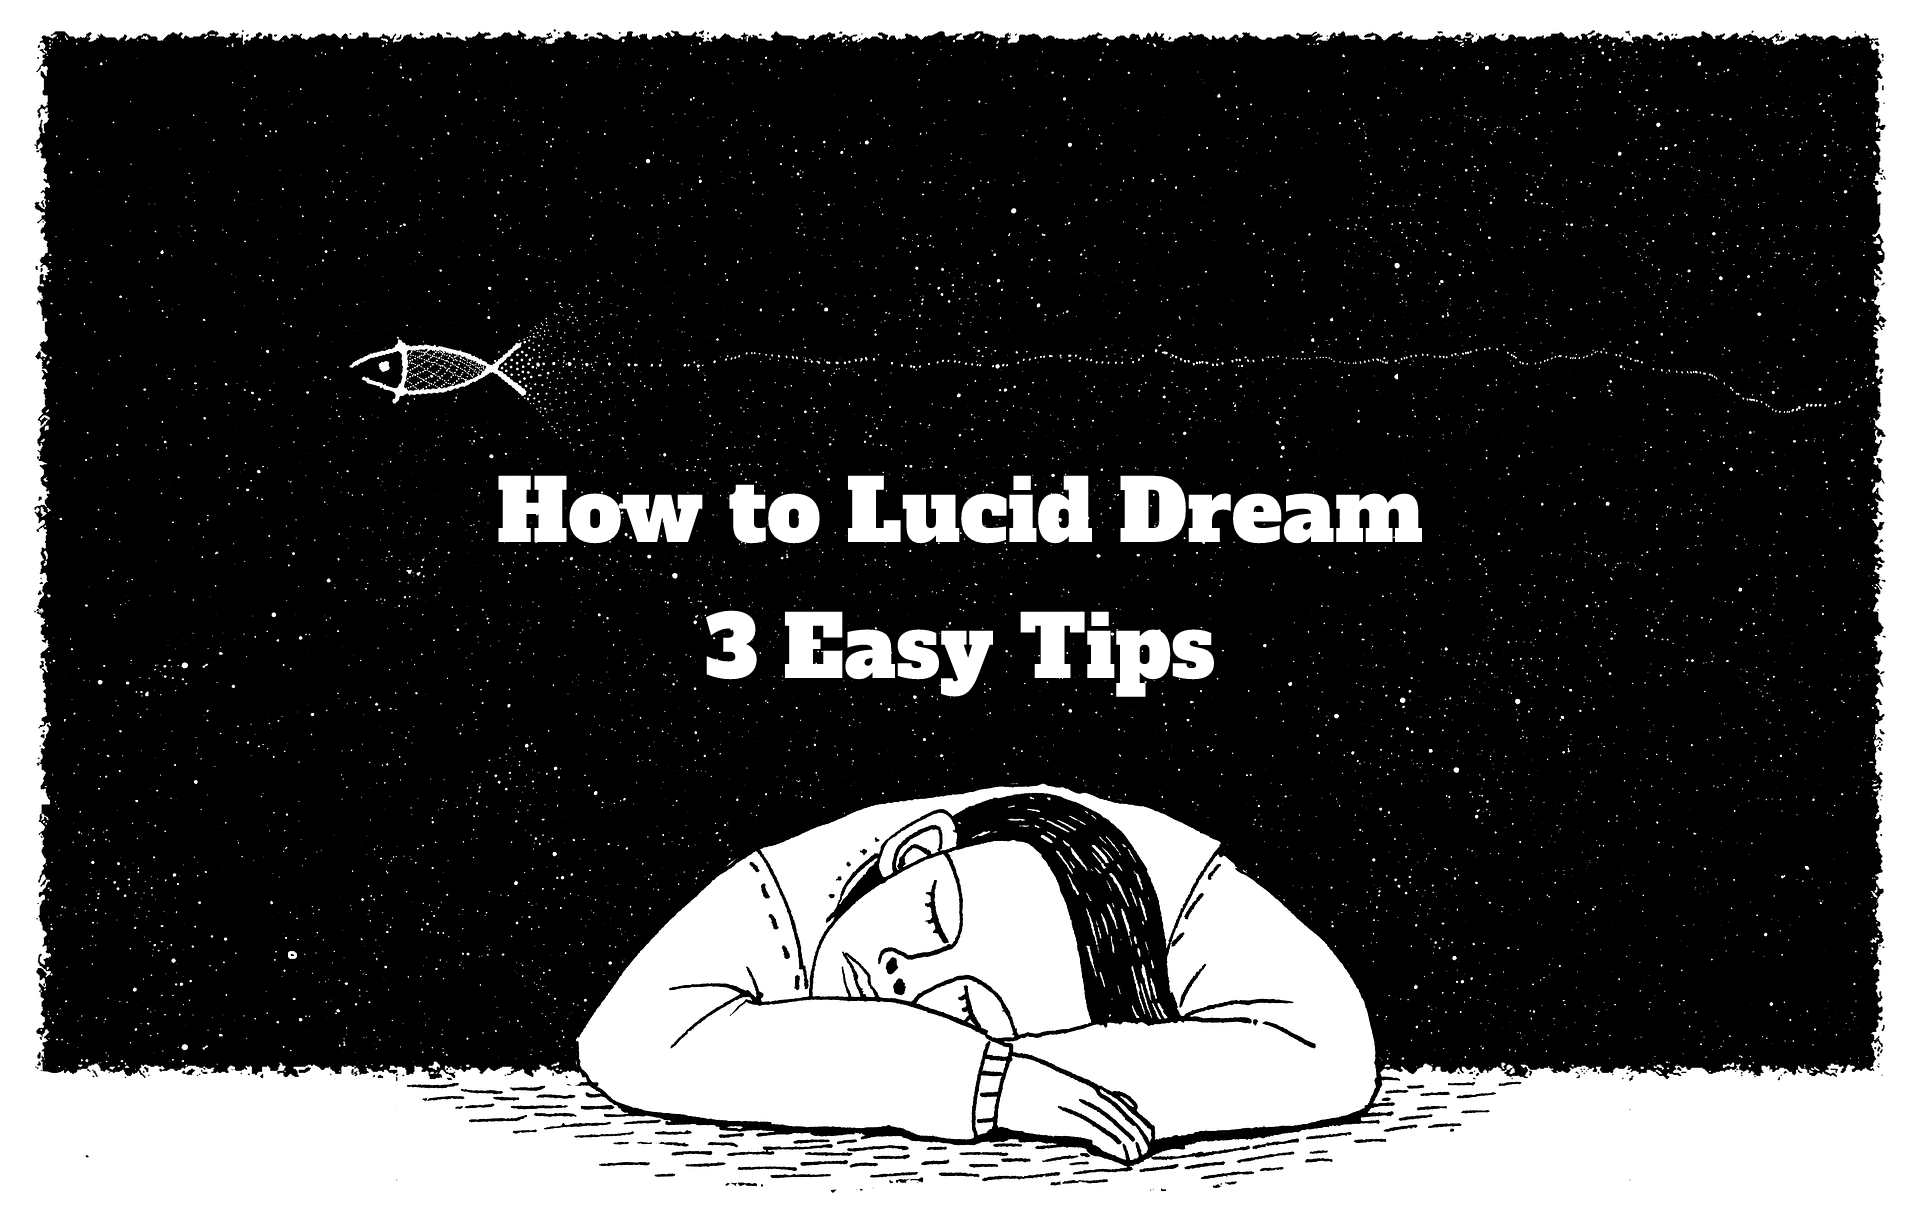 How to Lucid Dream – Three Easy Tips to Get Started